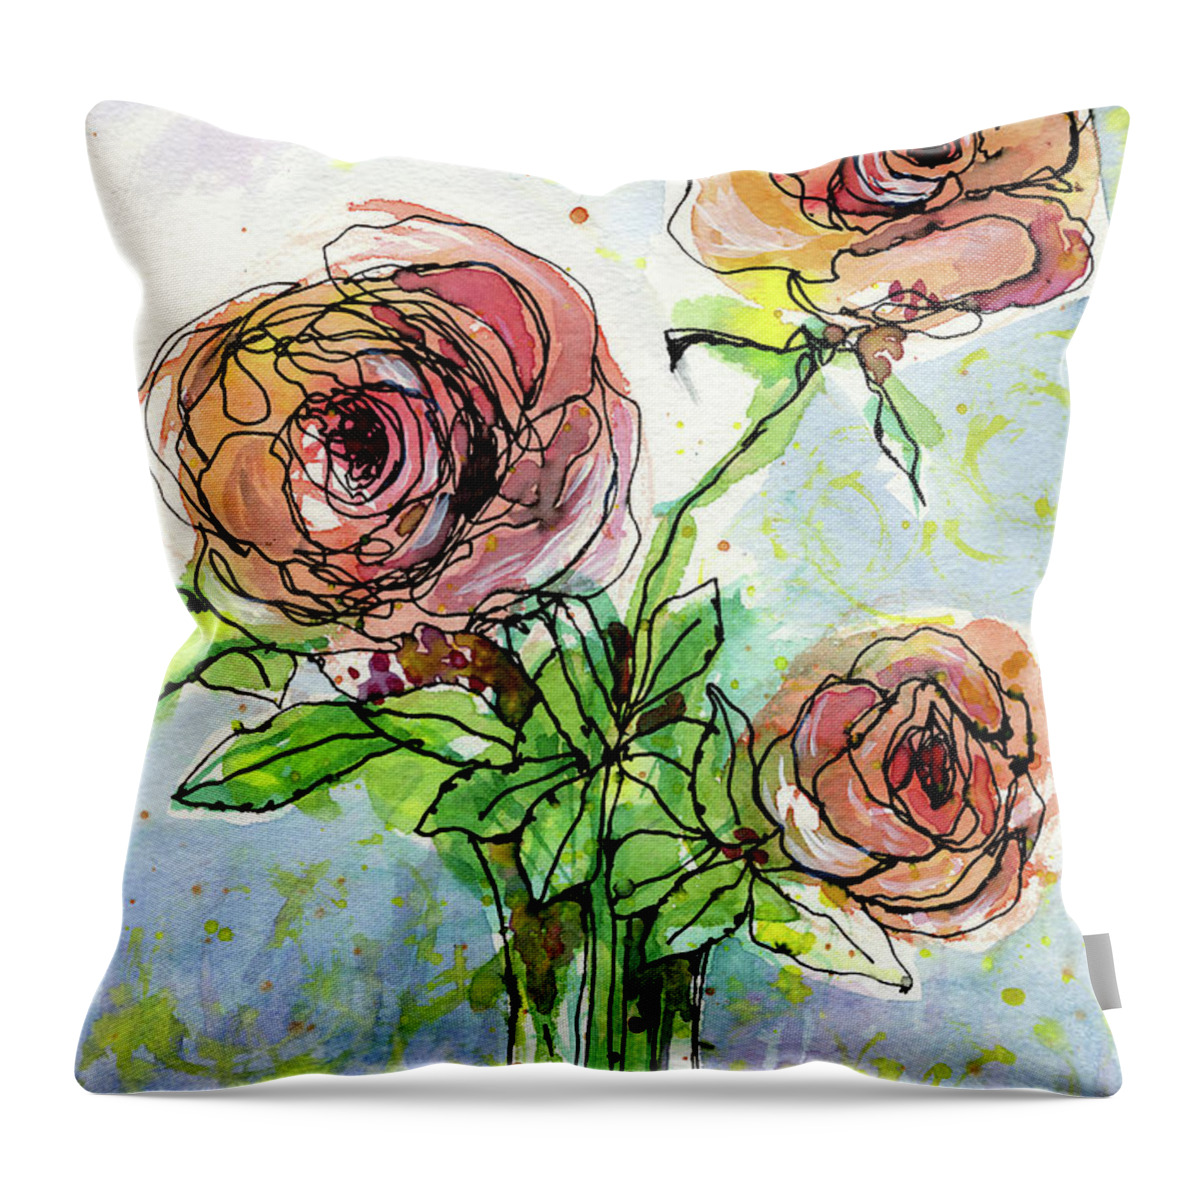 Watercolor Throw Pillow featuring the painting Three Roses by AnneMarie Welsh